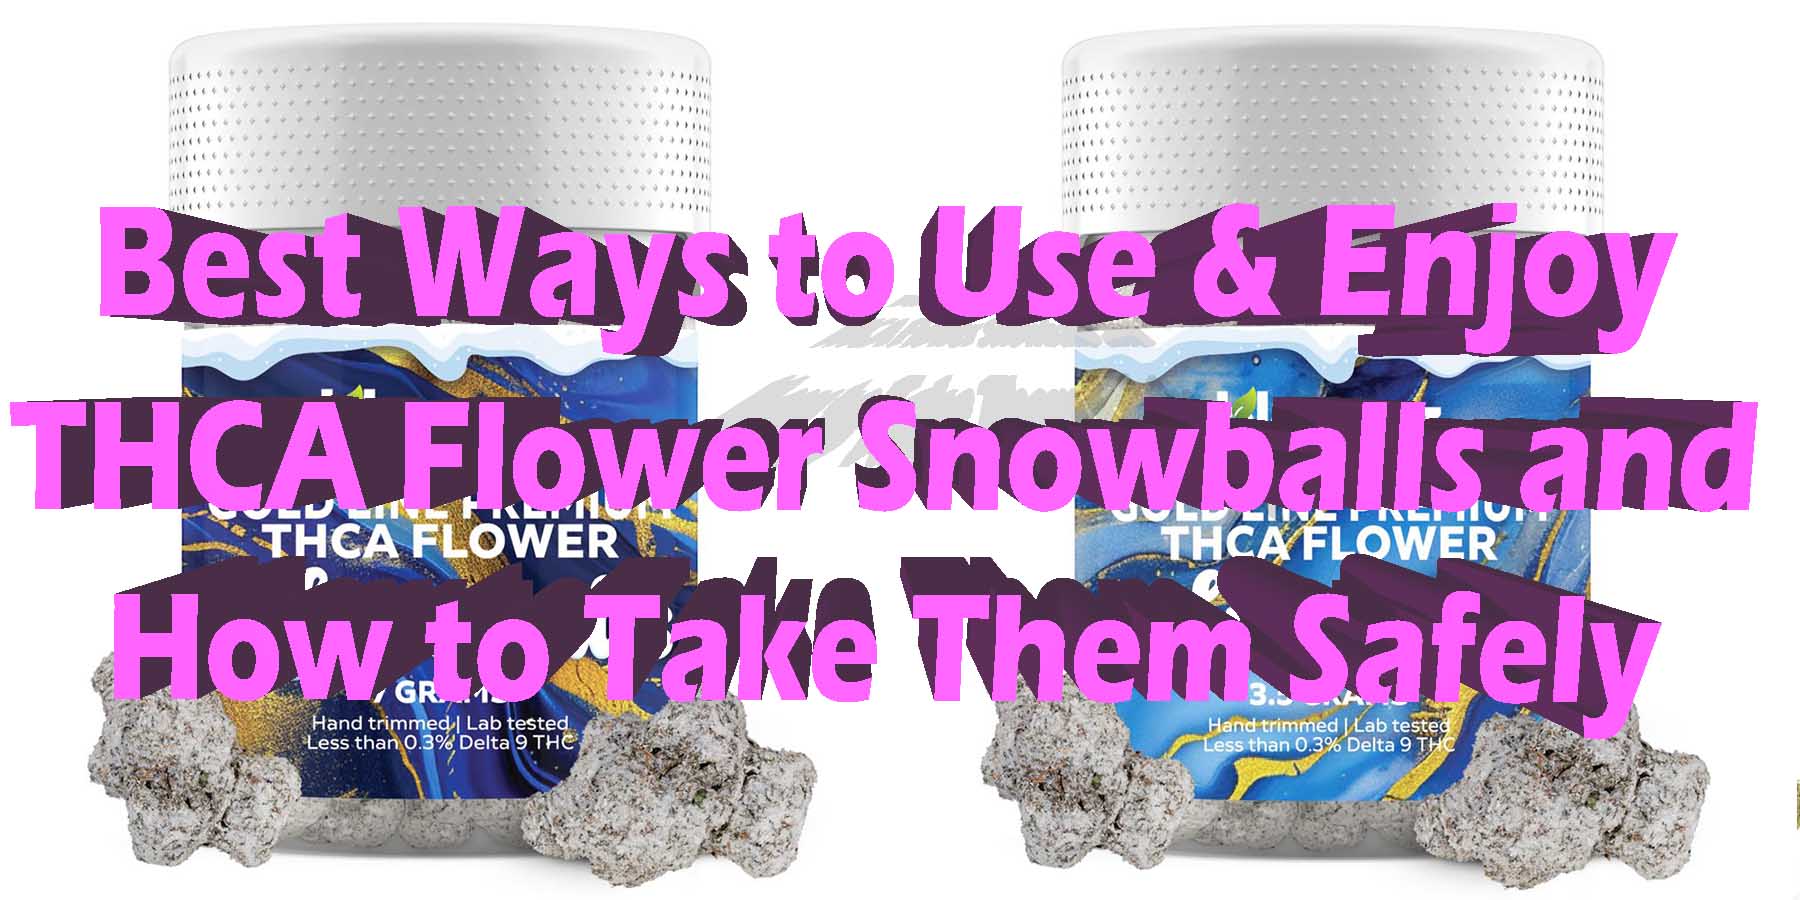 Best Ways to Use Enjoy THCA Flower Snowballs and How to Take Them Safely LowestPrice Coupon Discount For Smoking Best High Smoke Shop Online Near Me Bloomz